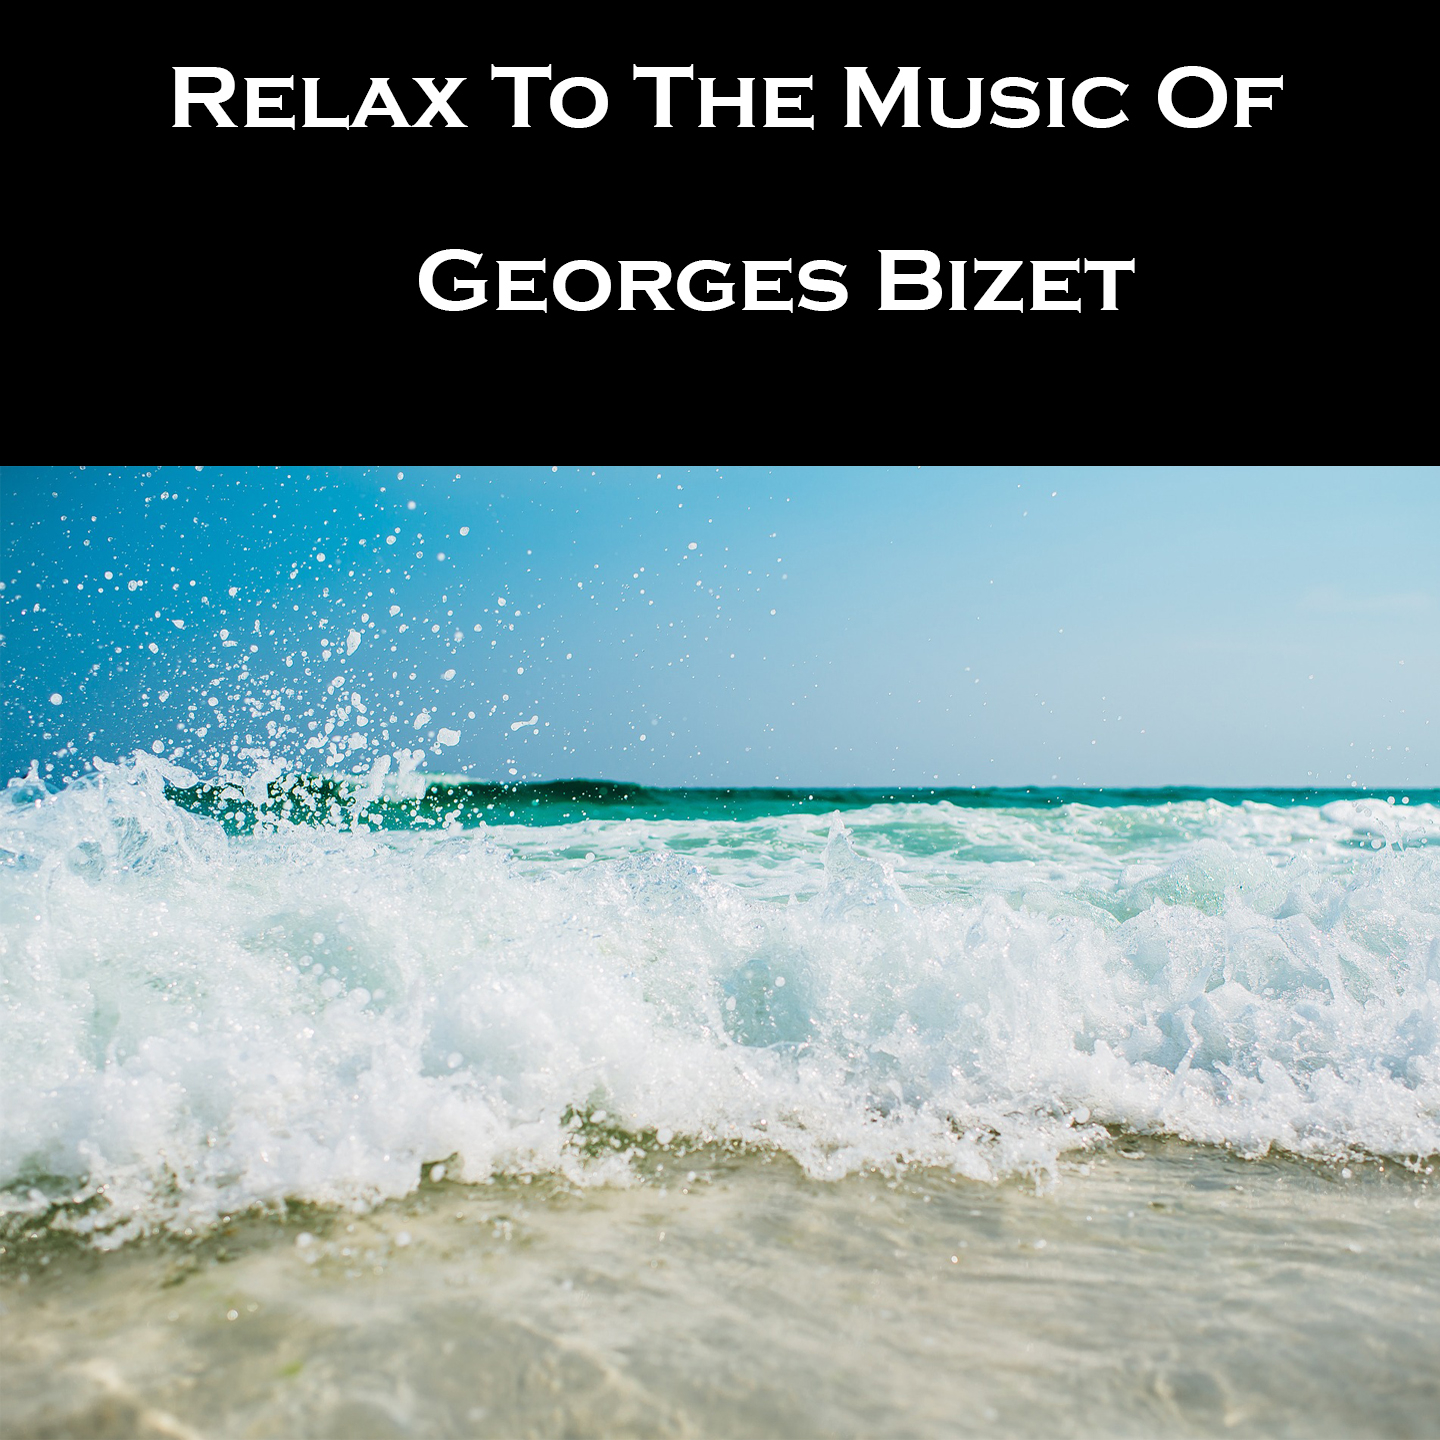 Relax To The Music Of Georges Bizet